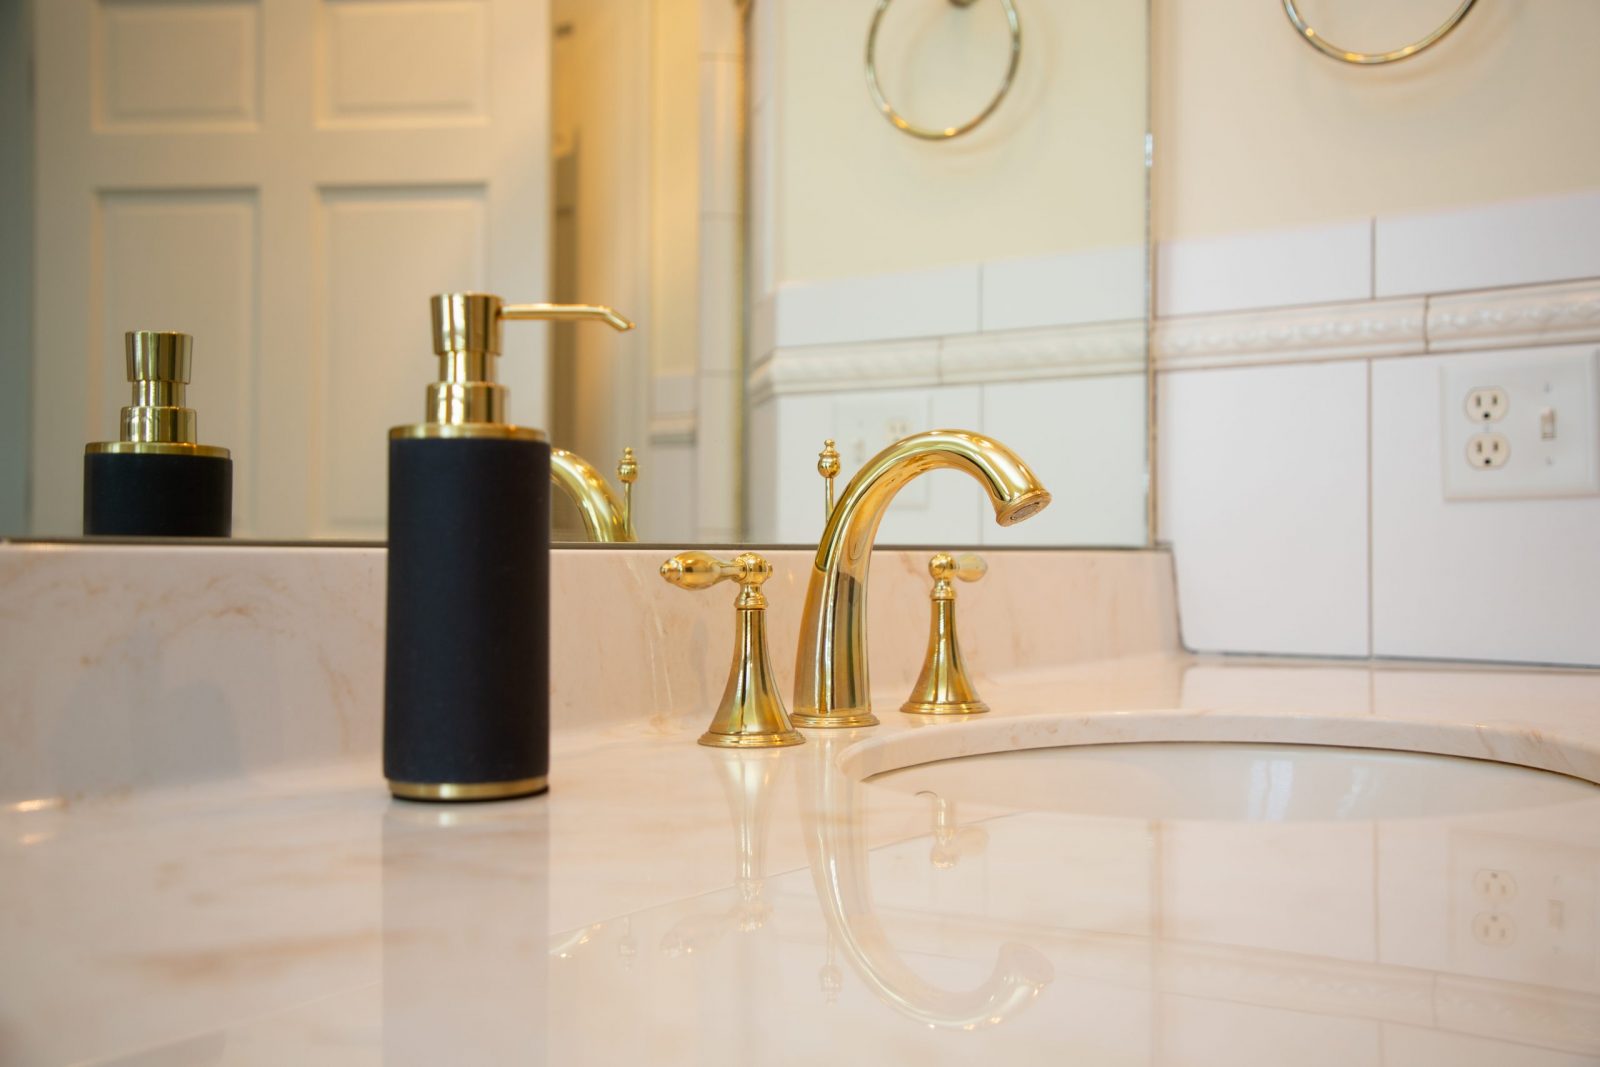 Gold sink fixtures and light marble counter